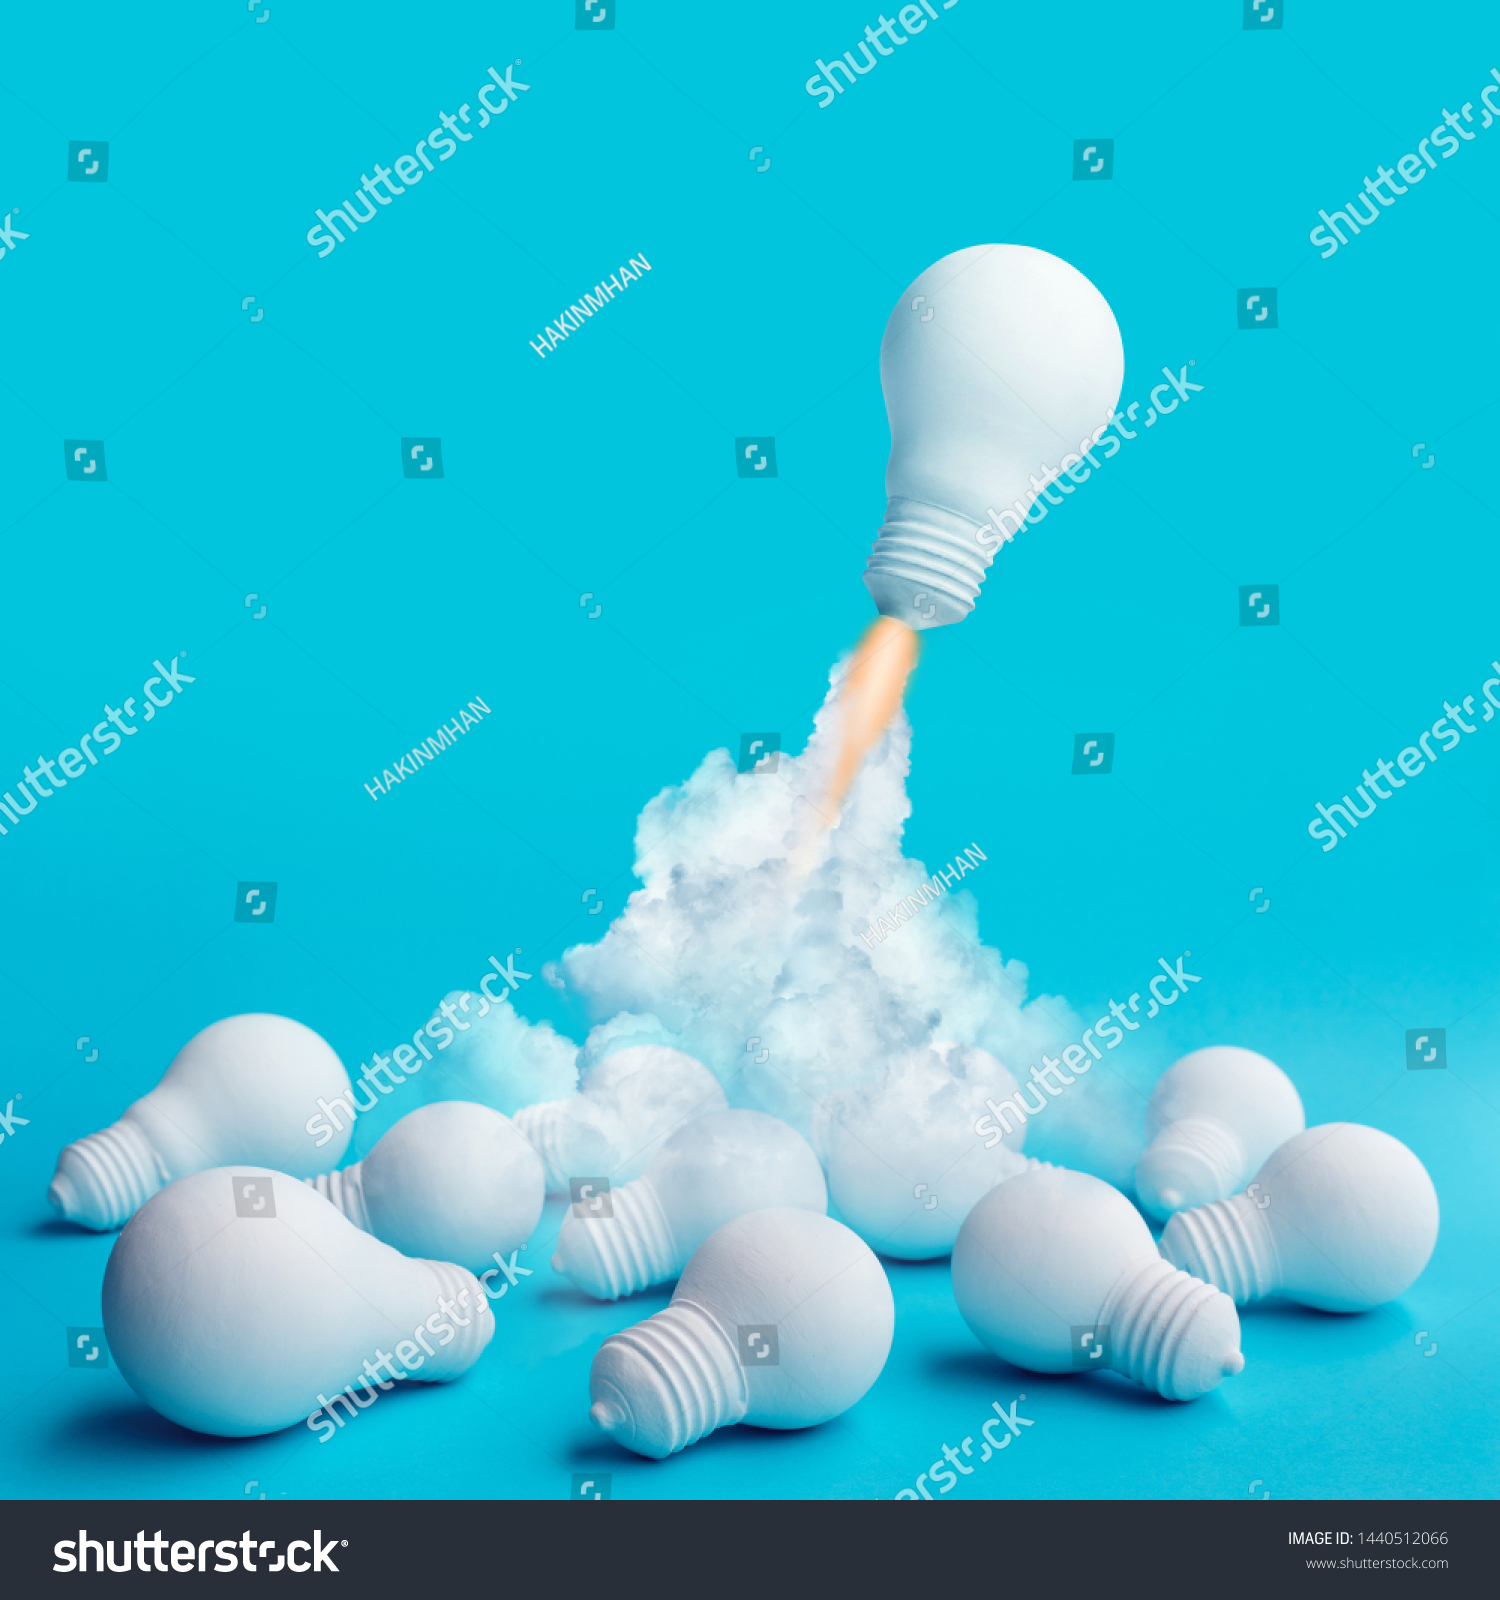 Ideas inspiration concepts with rocket lightbulb flying on group of another lightbulb.Business start up or goal to success. creativity of human #1440512066